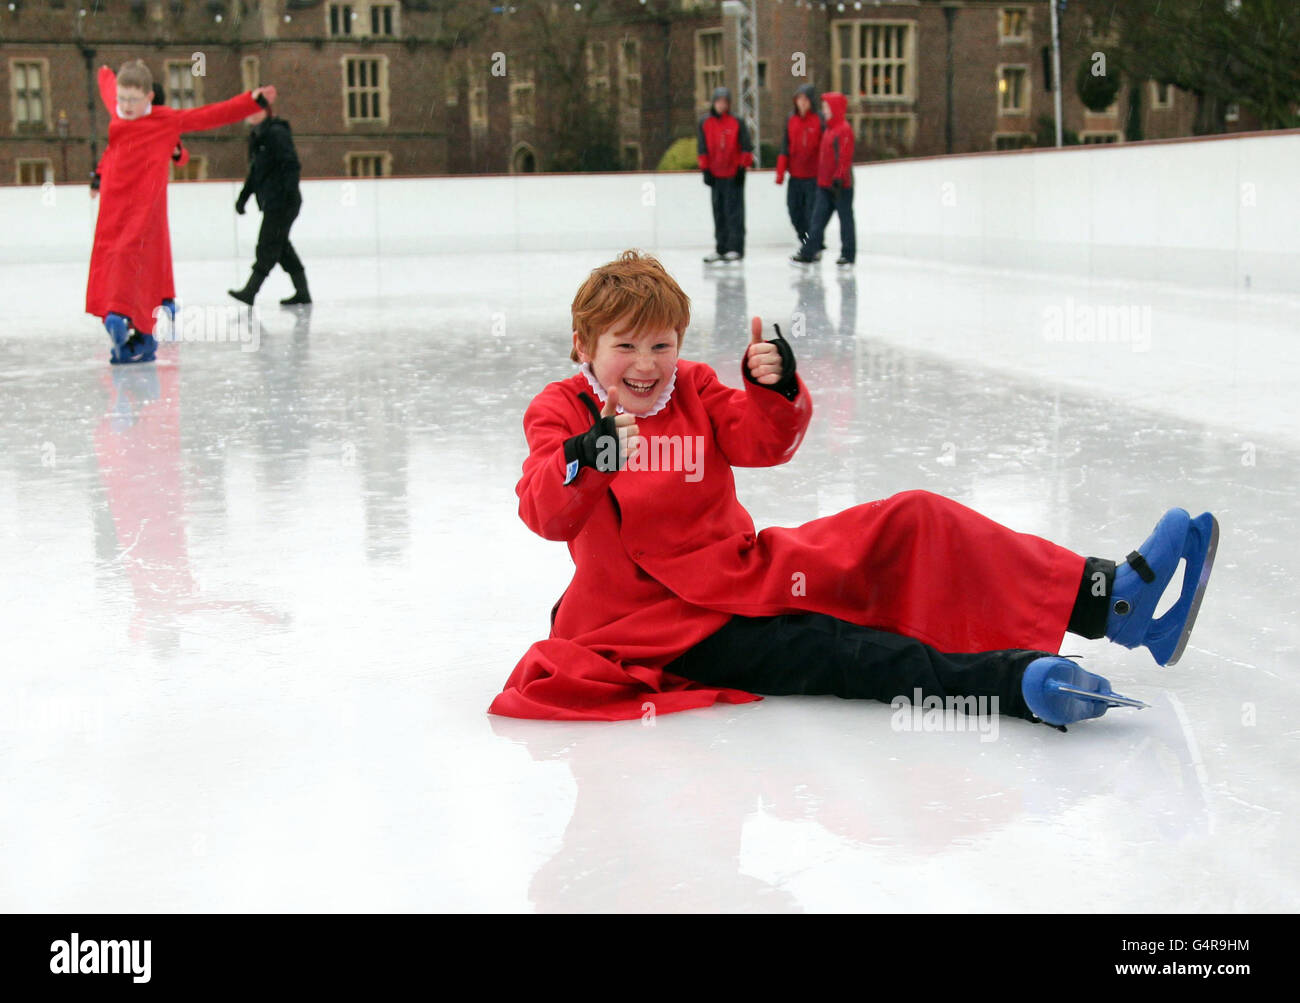 One of seventeen Chapel Royal Choirboys aged 8-13 skating at Hampton Court Palace Ice Rink in Kingston. Stock Photo